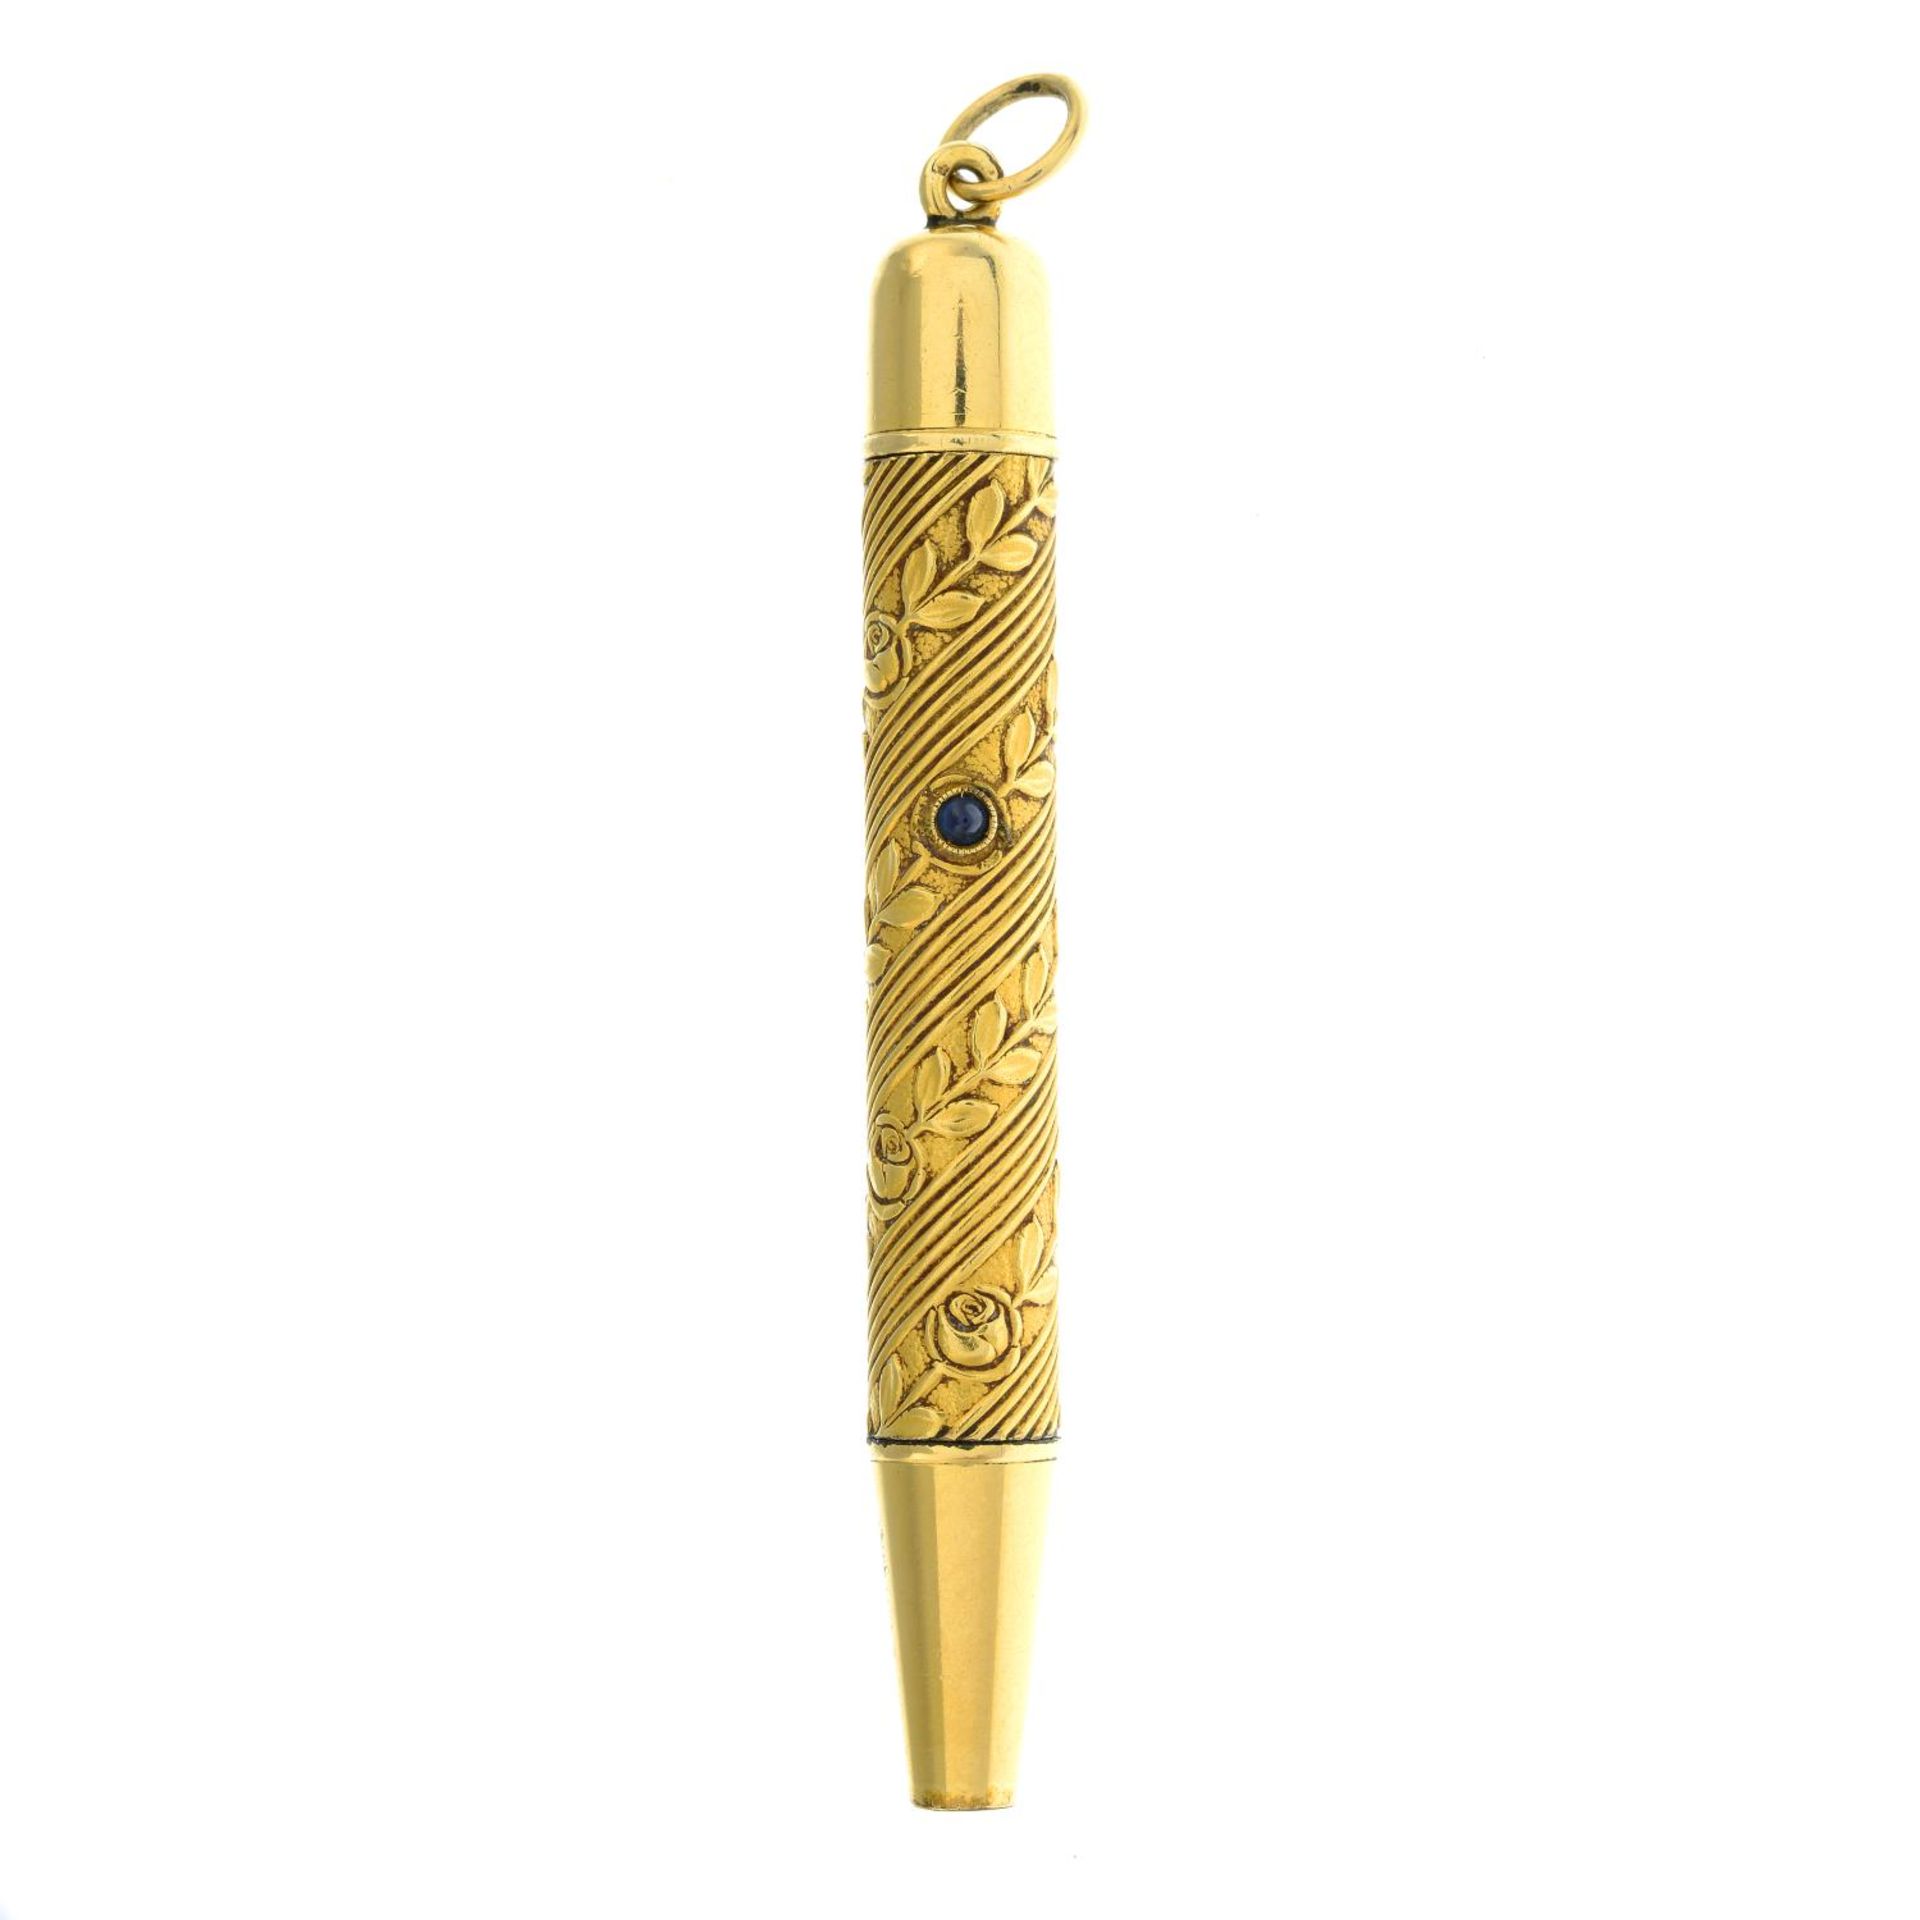 An early 20th century gold cased pencil with diamond and sapphire accents.Stamped 18Kt Rf.